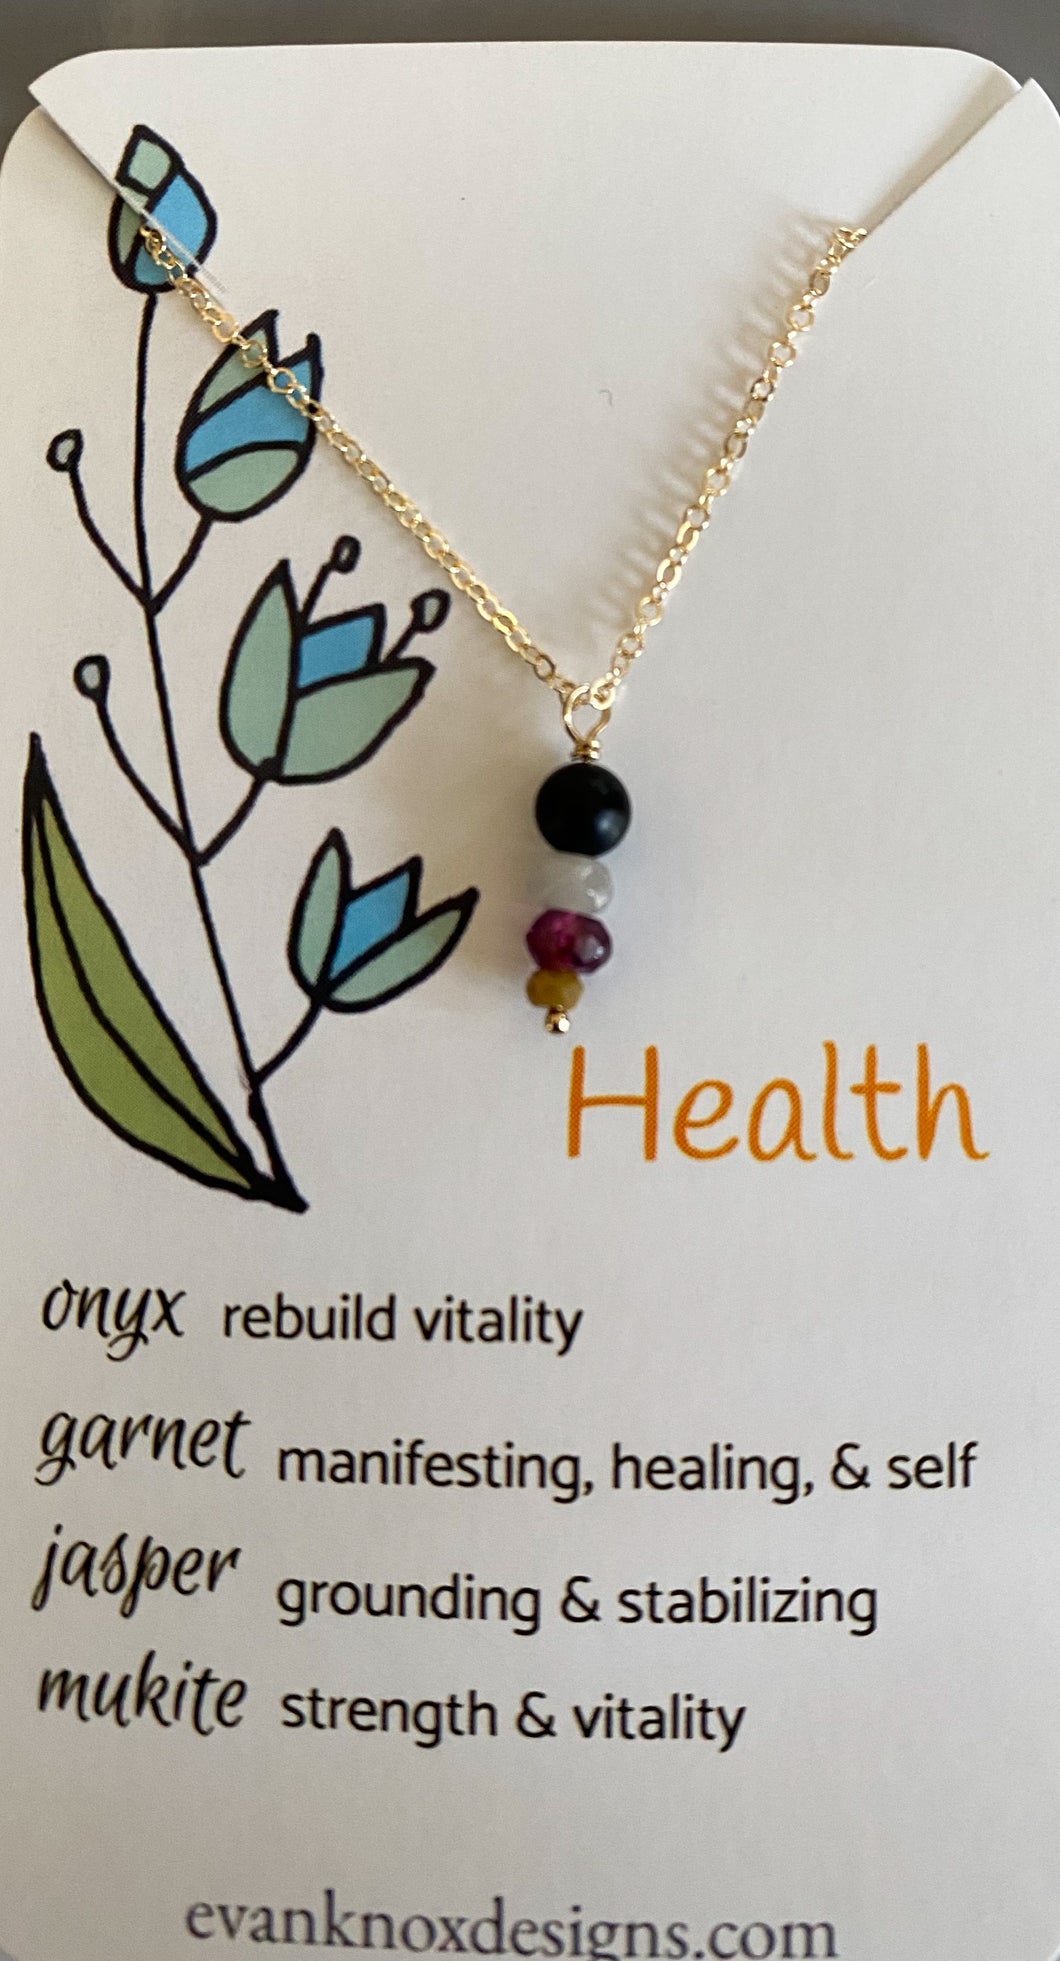 Health necklace in gold